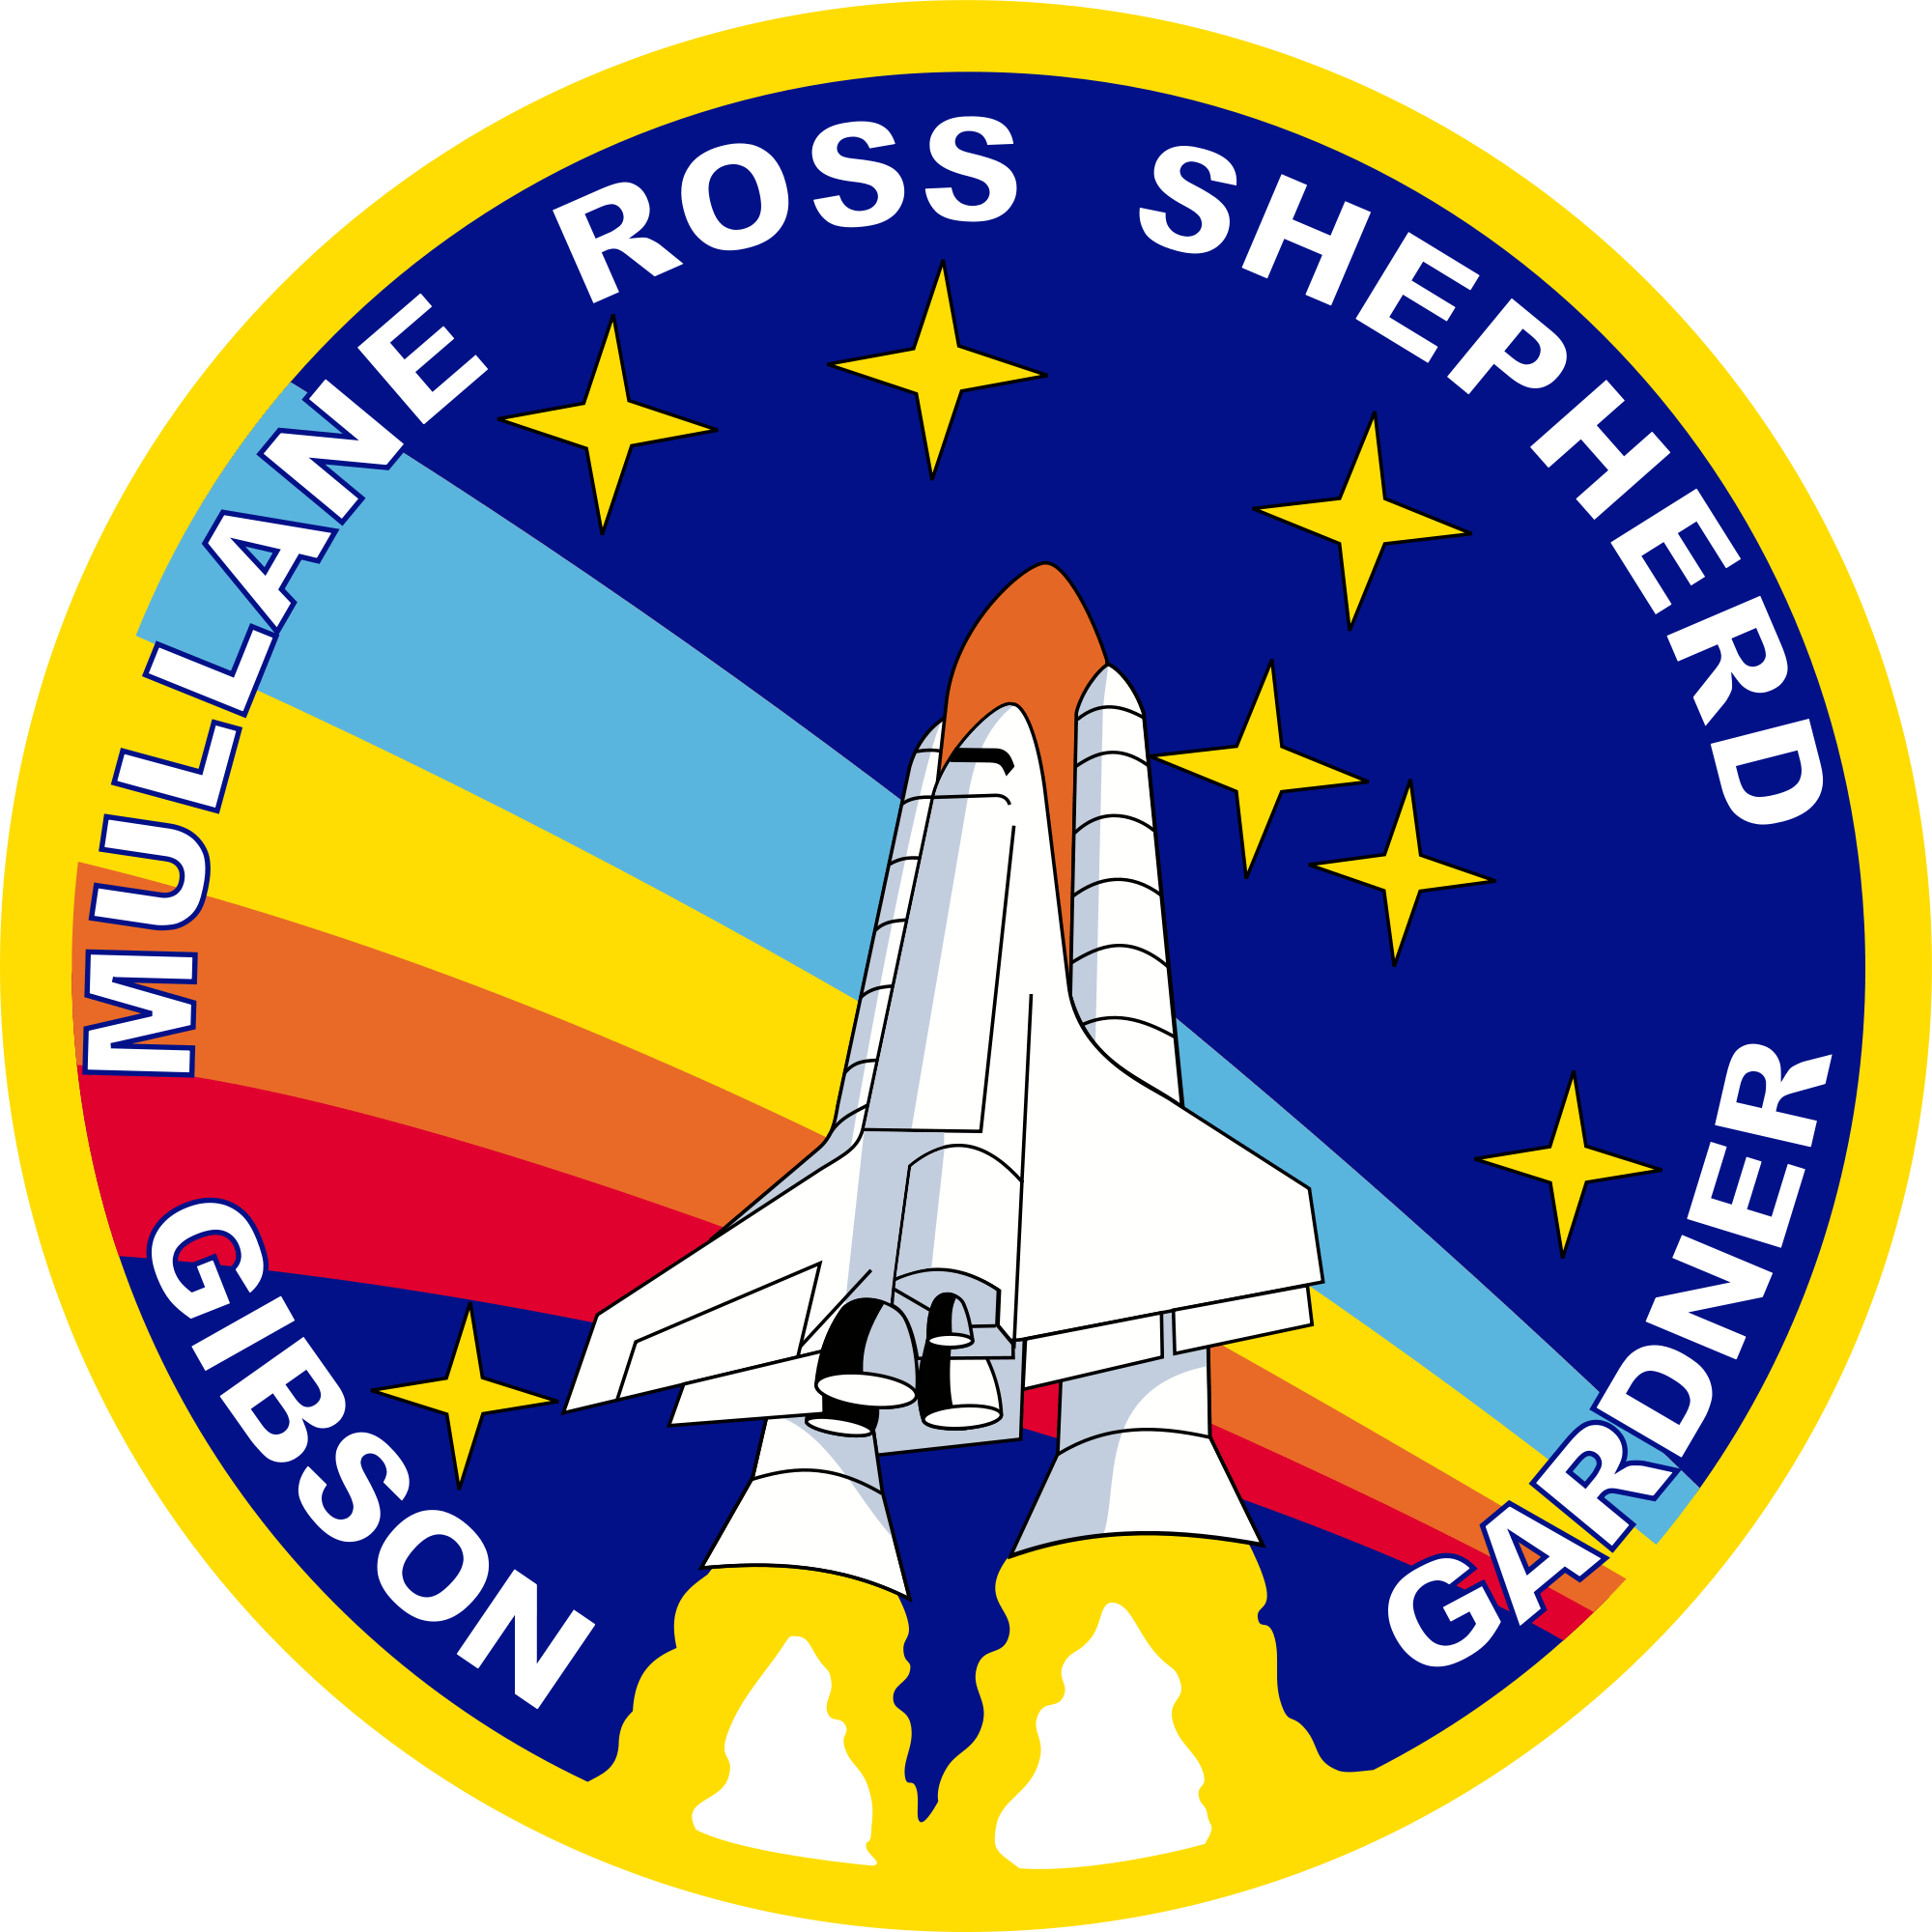 NASA Spaceship Logo - File:Sts-27-patch.svg - Wikimedia Commons